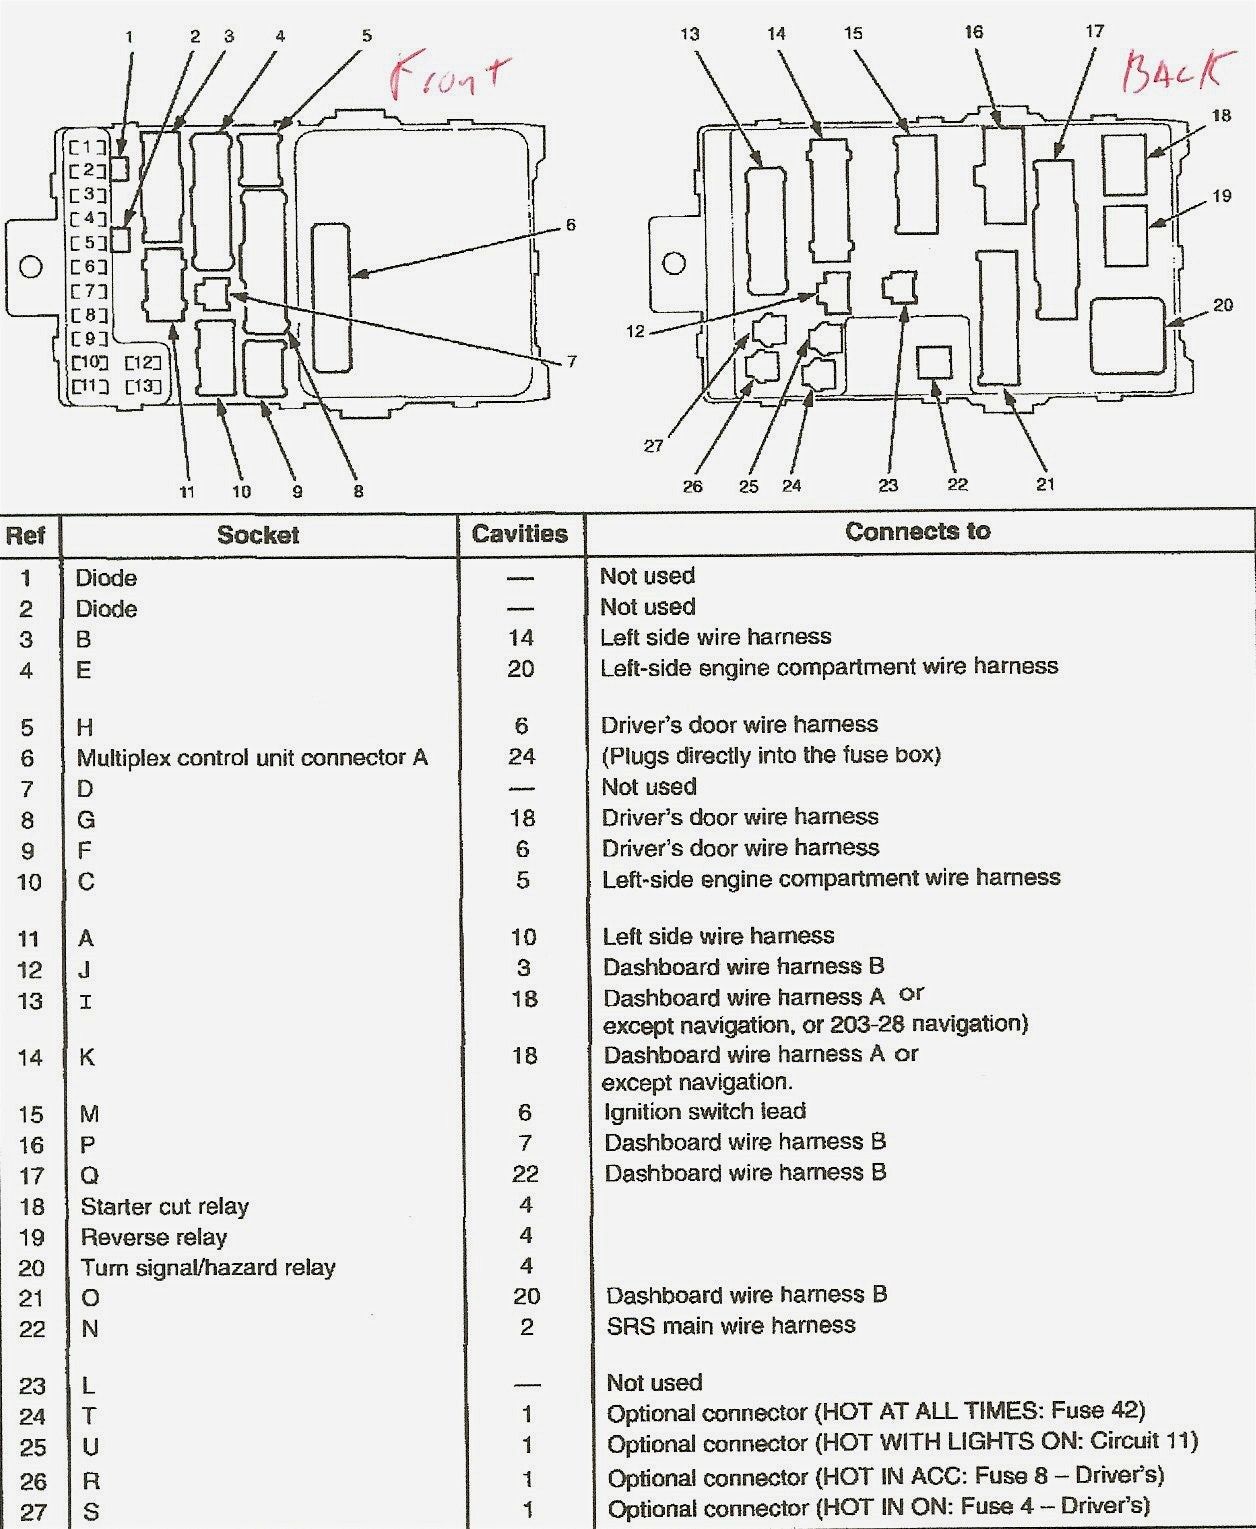 Fuse Box On Honda Crv | schematic and wiring diagram